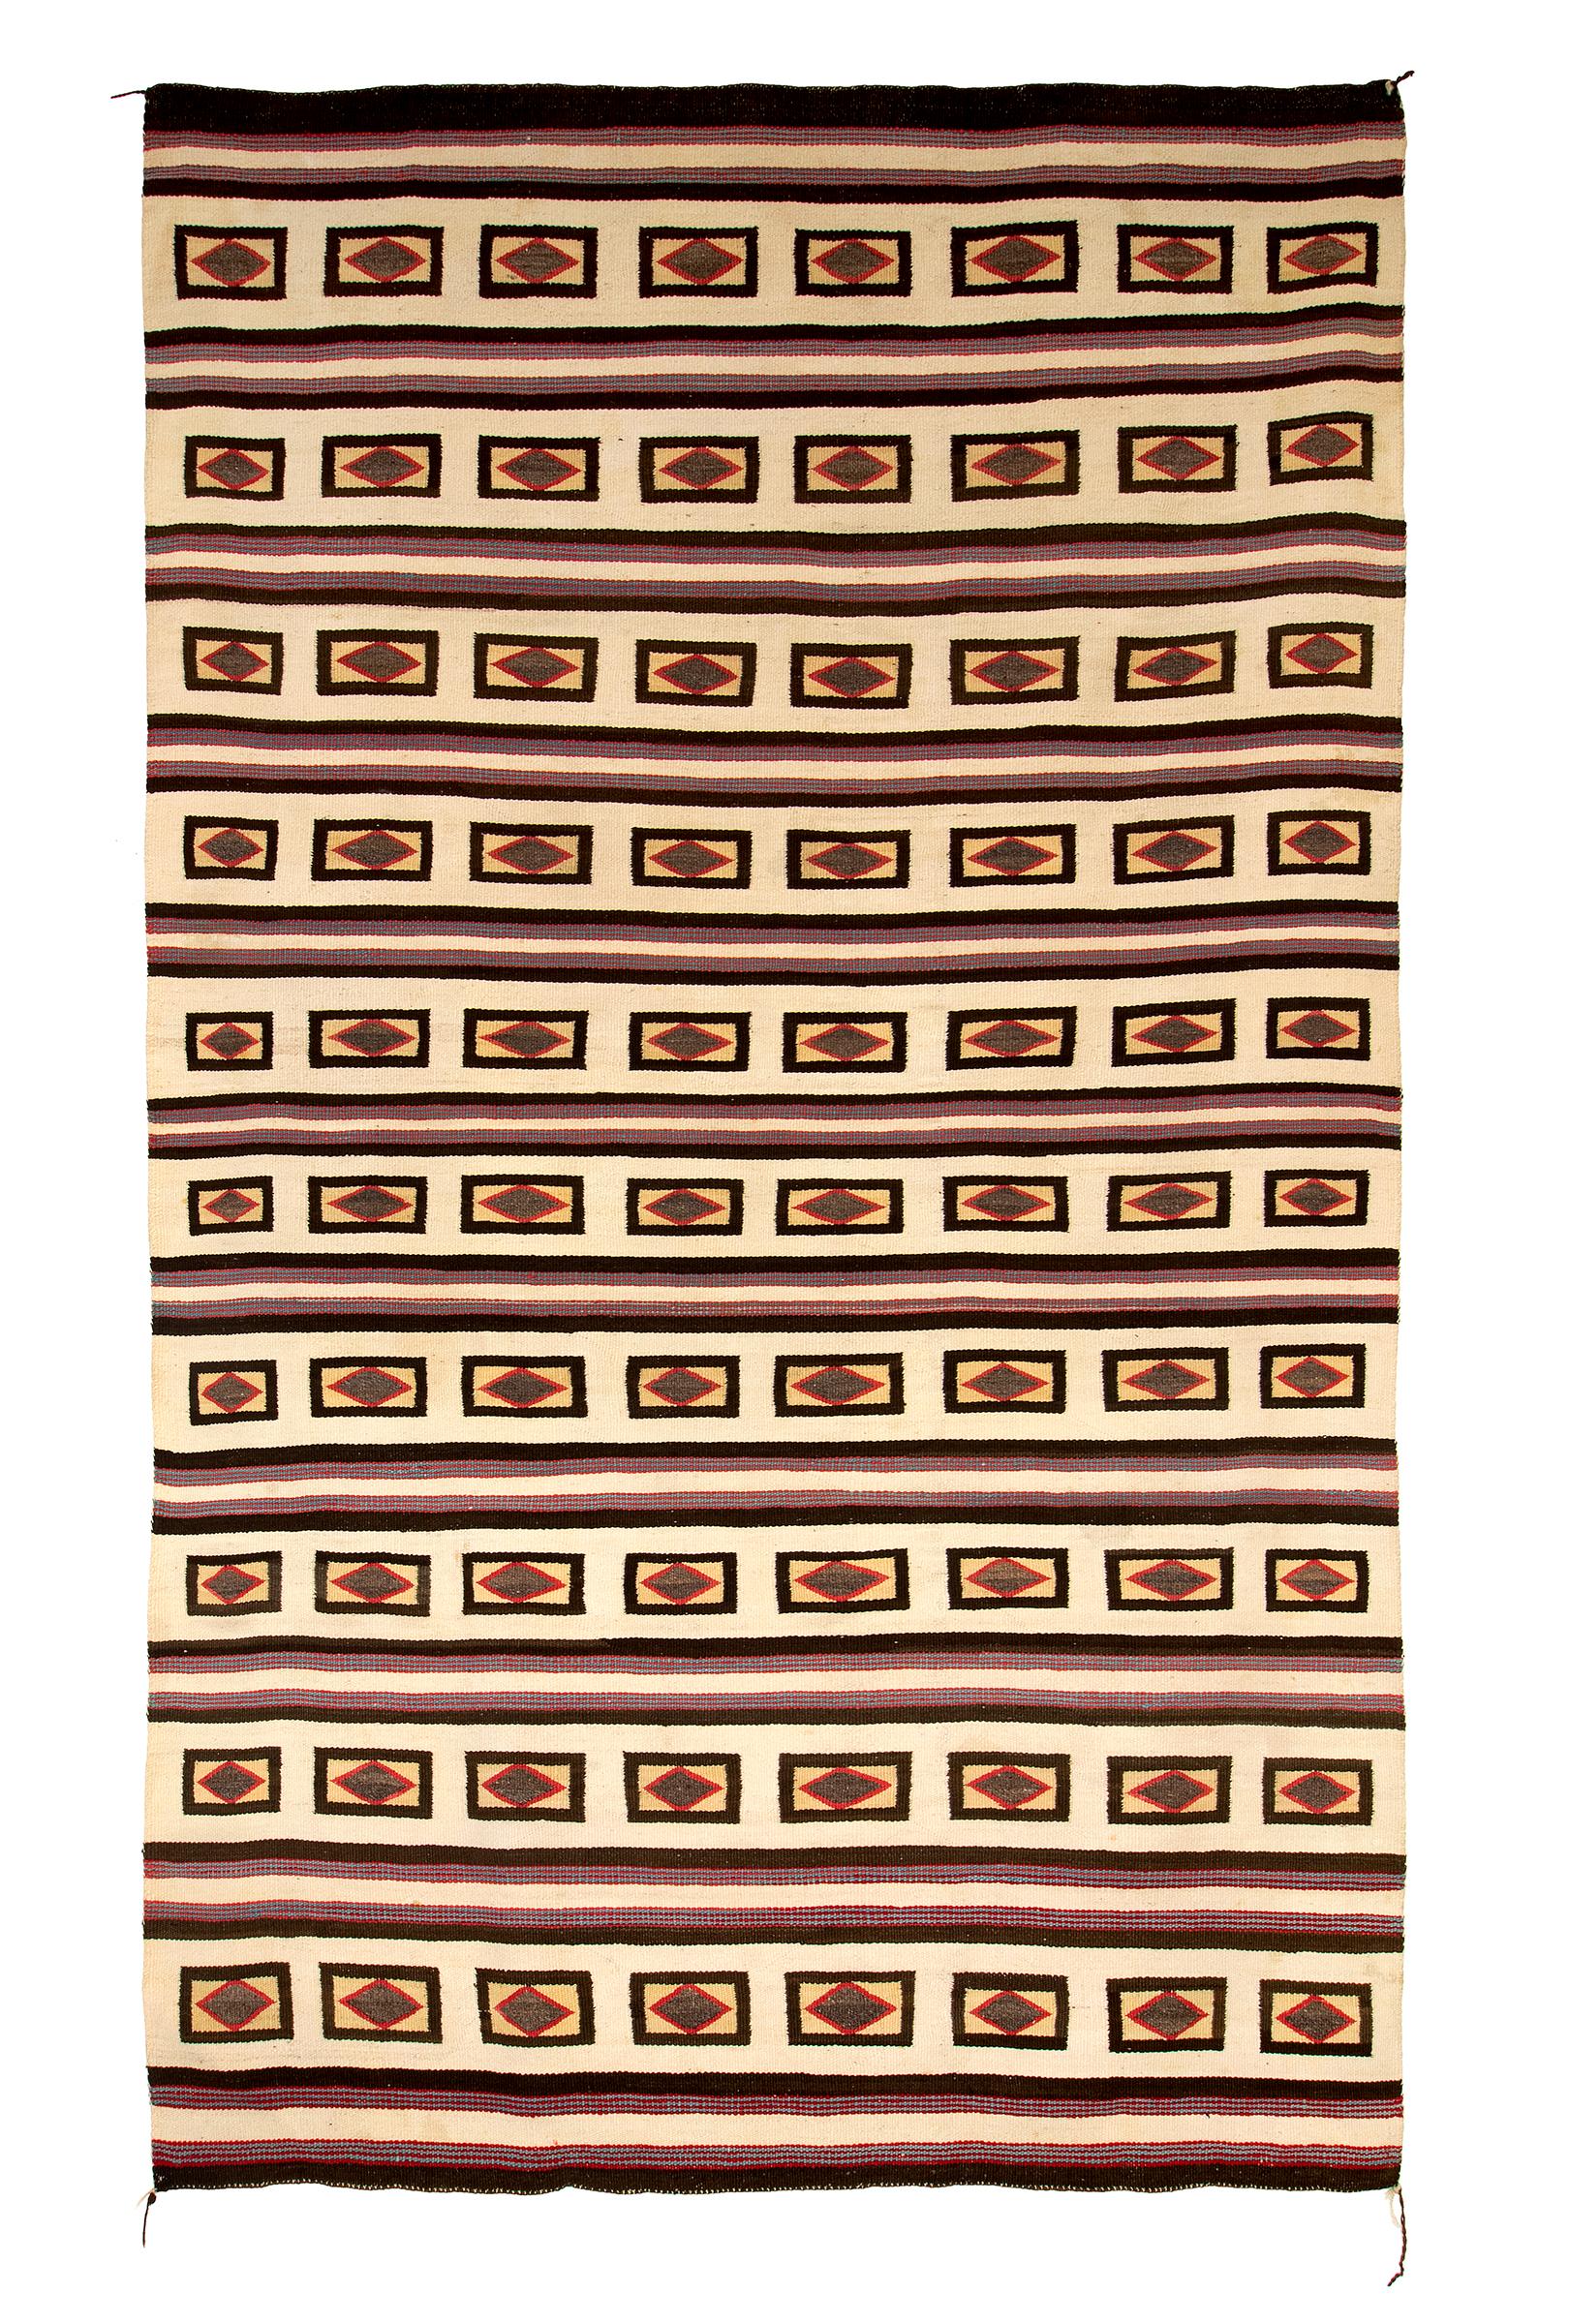 Mid-20th Century Navajo Rug 1930s, Chinle Stripe & Diamond Pattern Ivory Camel Brown Blue Red For Sale